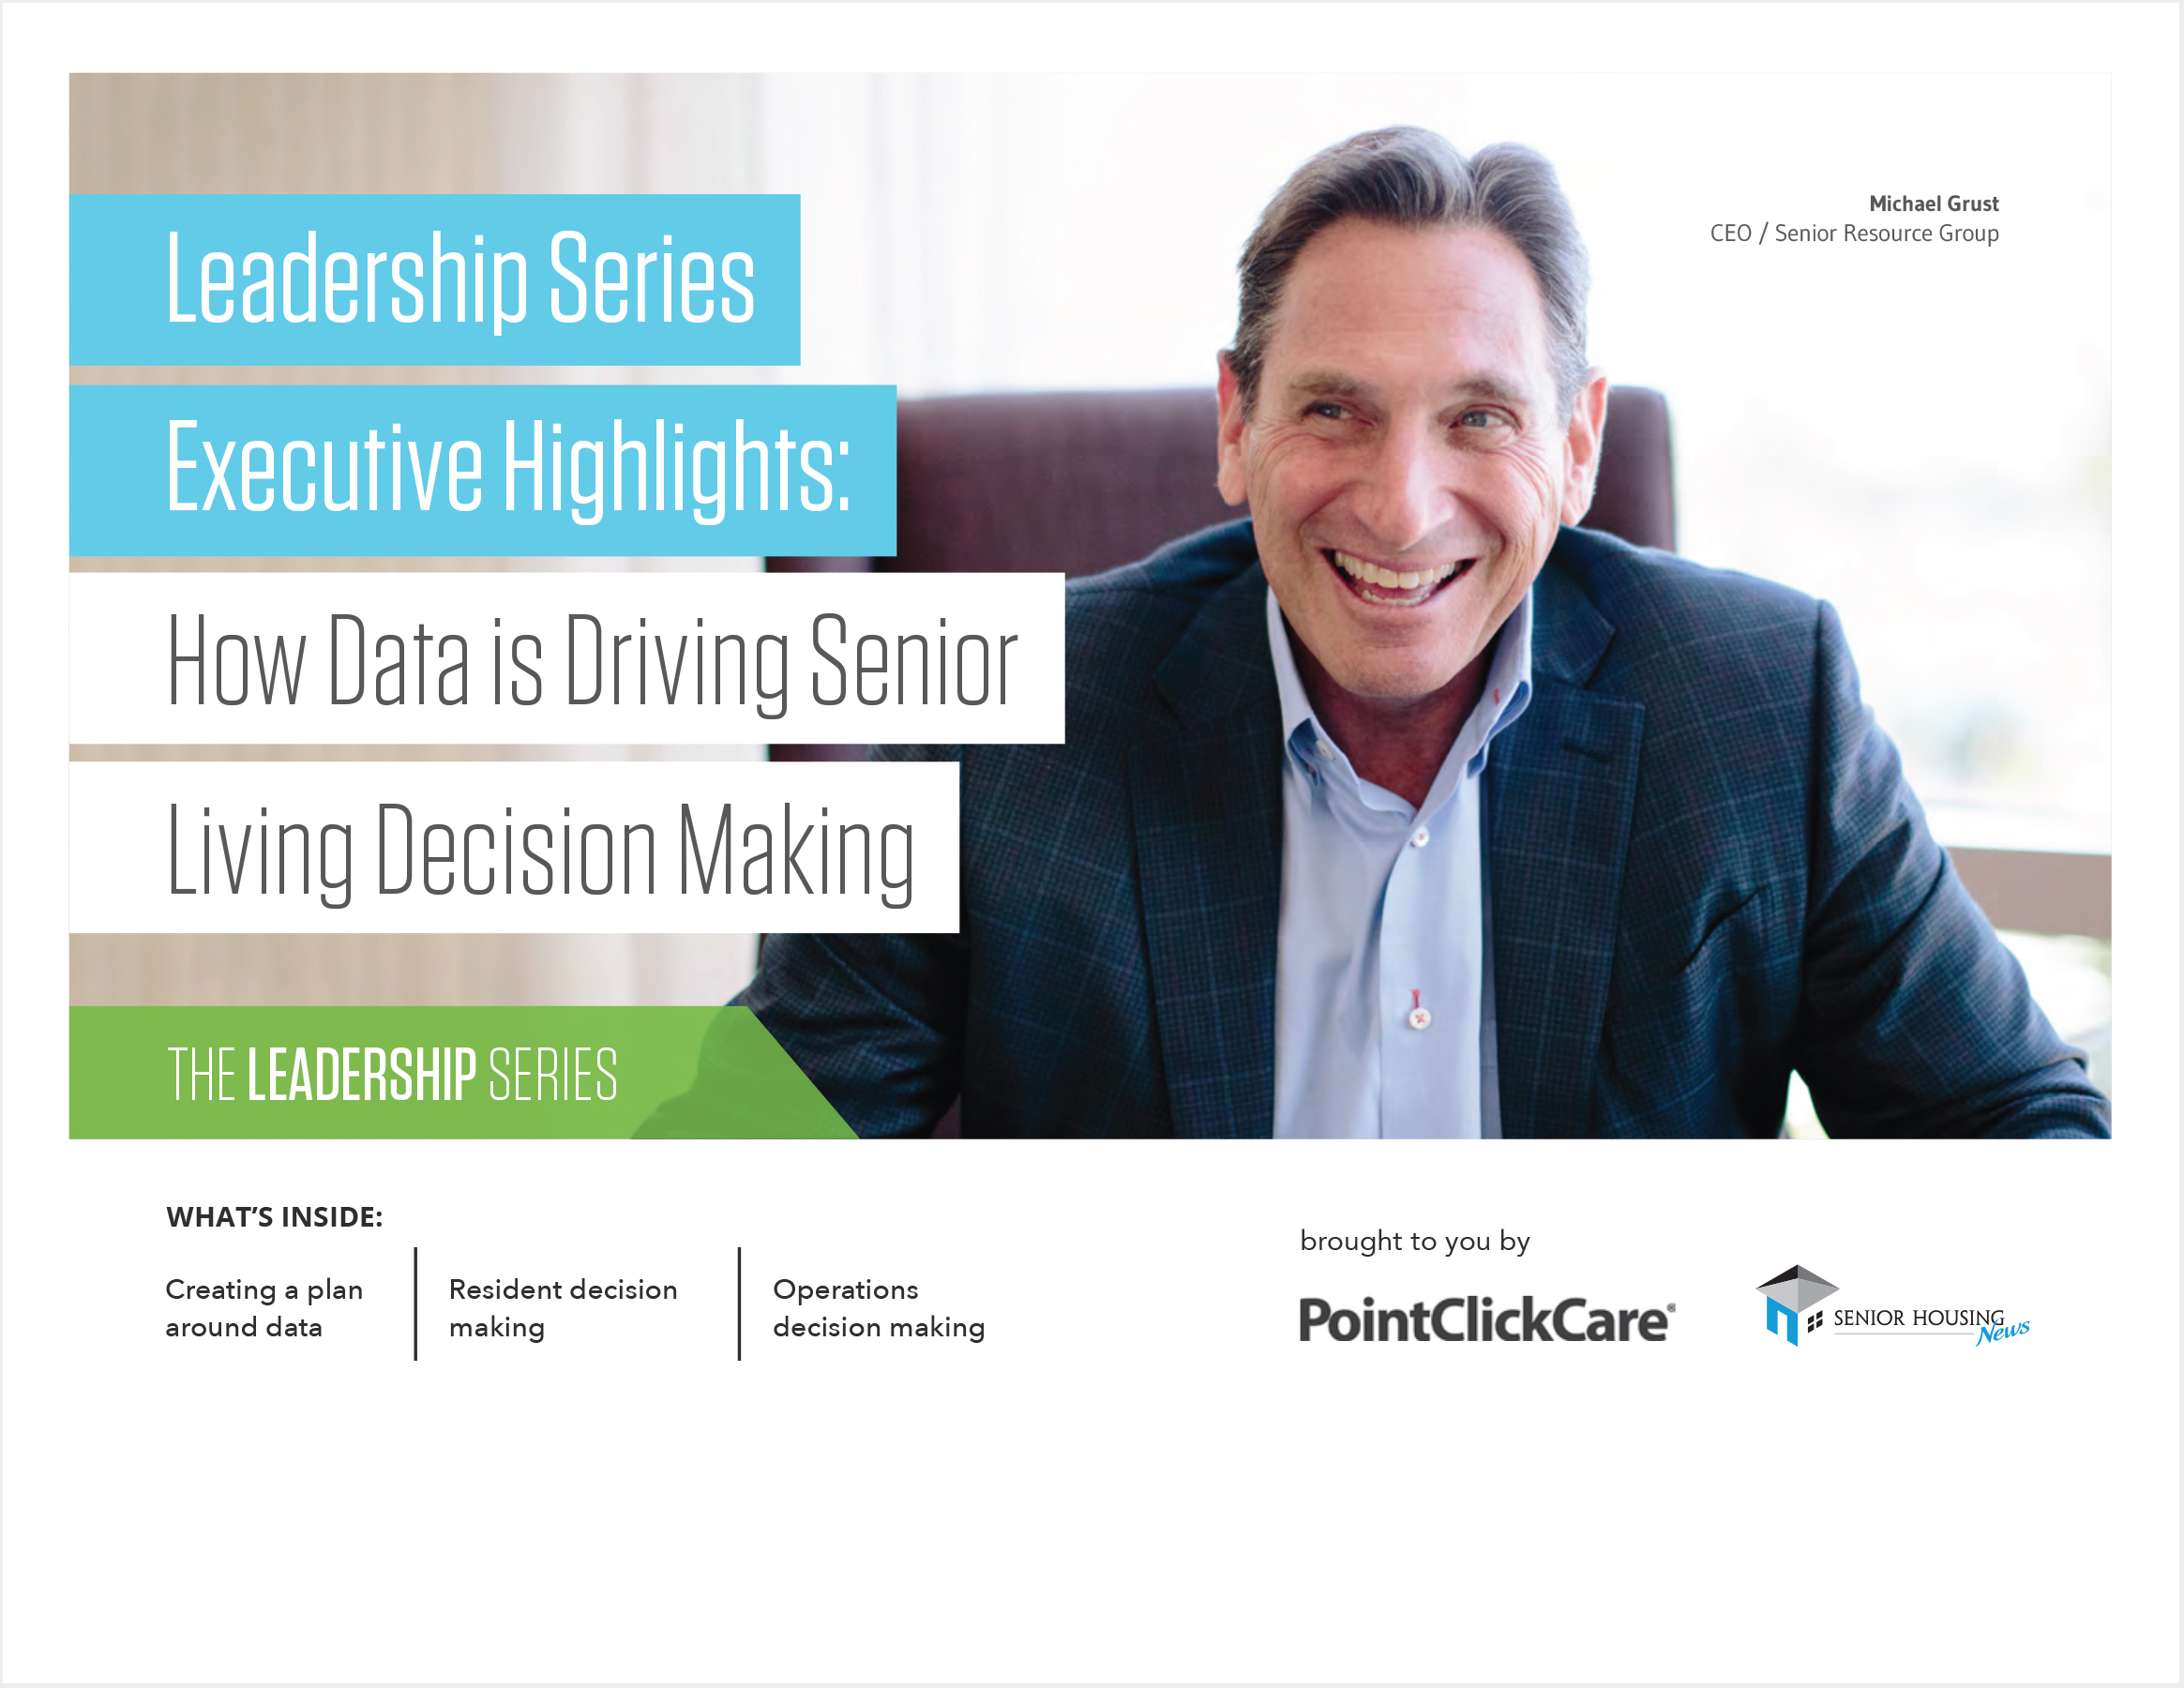 https://pointclickcare.com/wp-content/uploads/2021/07/pointclickcare-ebook-how-data-is-driving-senior-living-decision-making-cover-pg